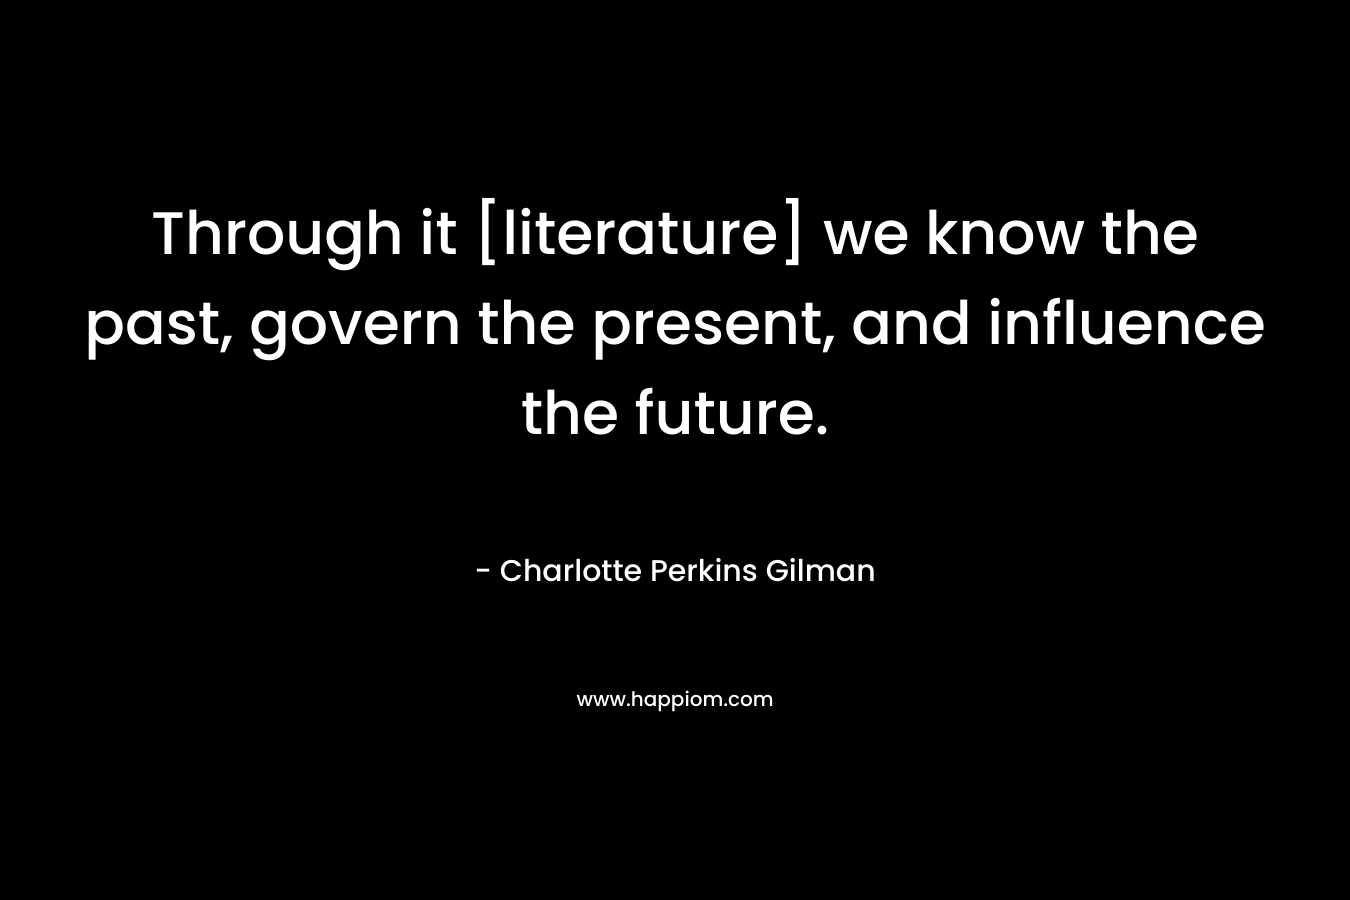 Through it [literature] we know the past, govern the present, and influence the future. – Charlotte Perkins Gilman